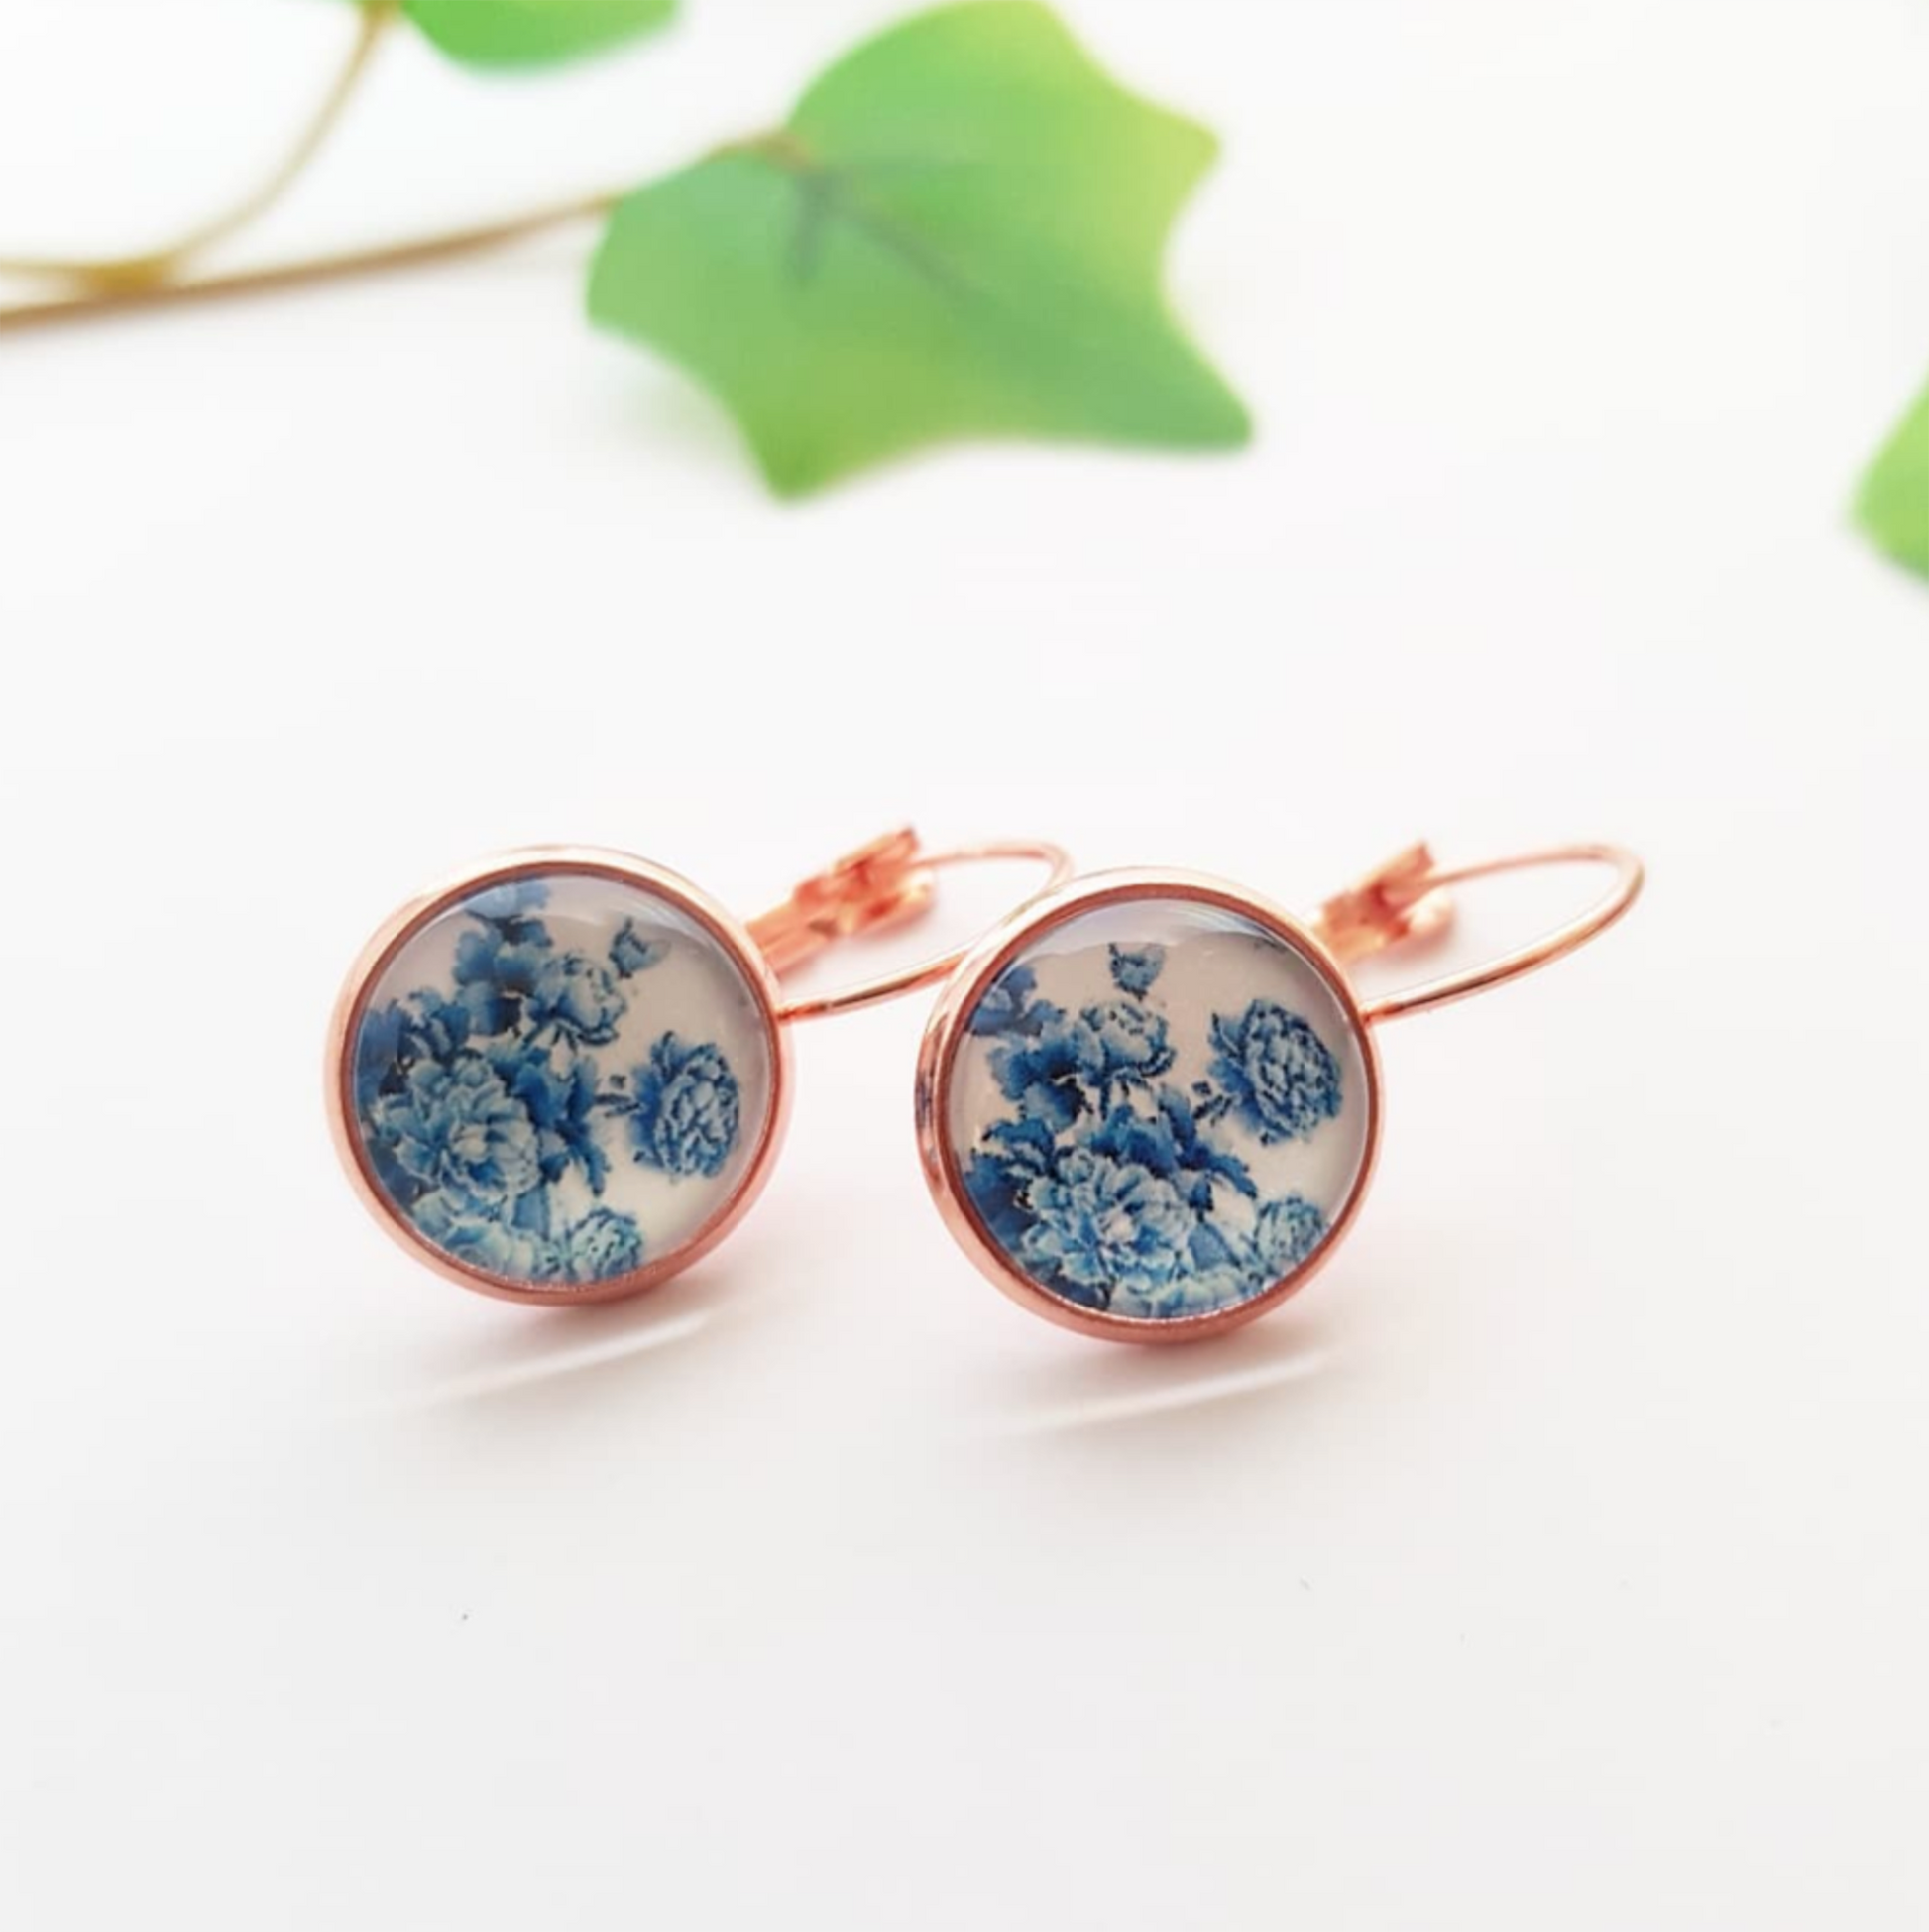 Blue Floral Cabochon earrings - Romantic and Shabby jewelry for woman - C o c o F l o w e r